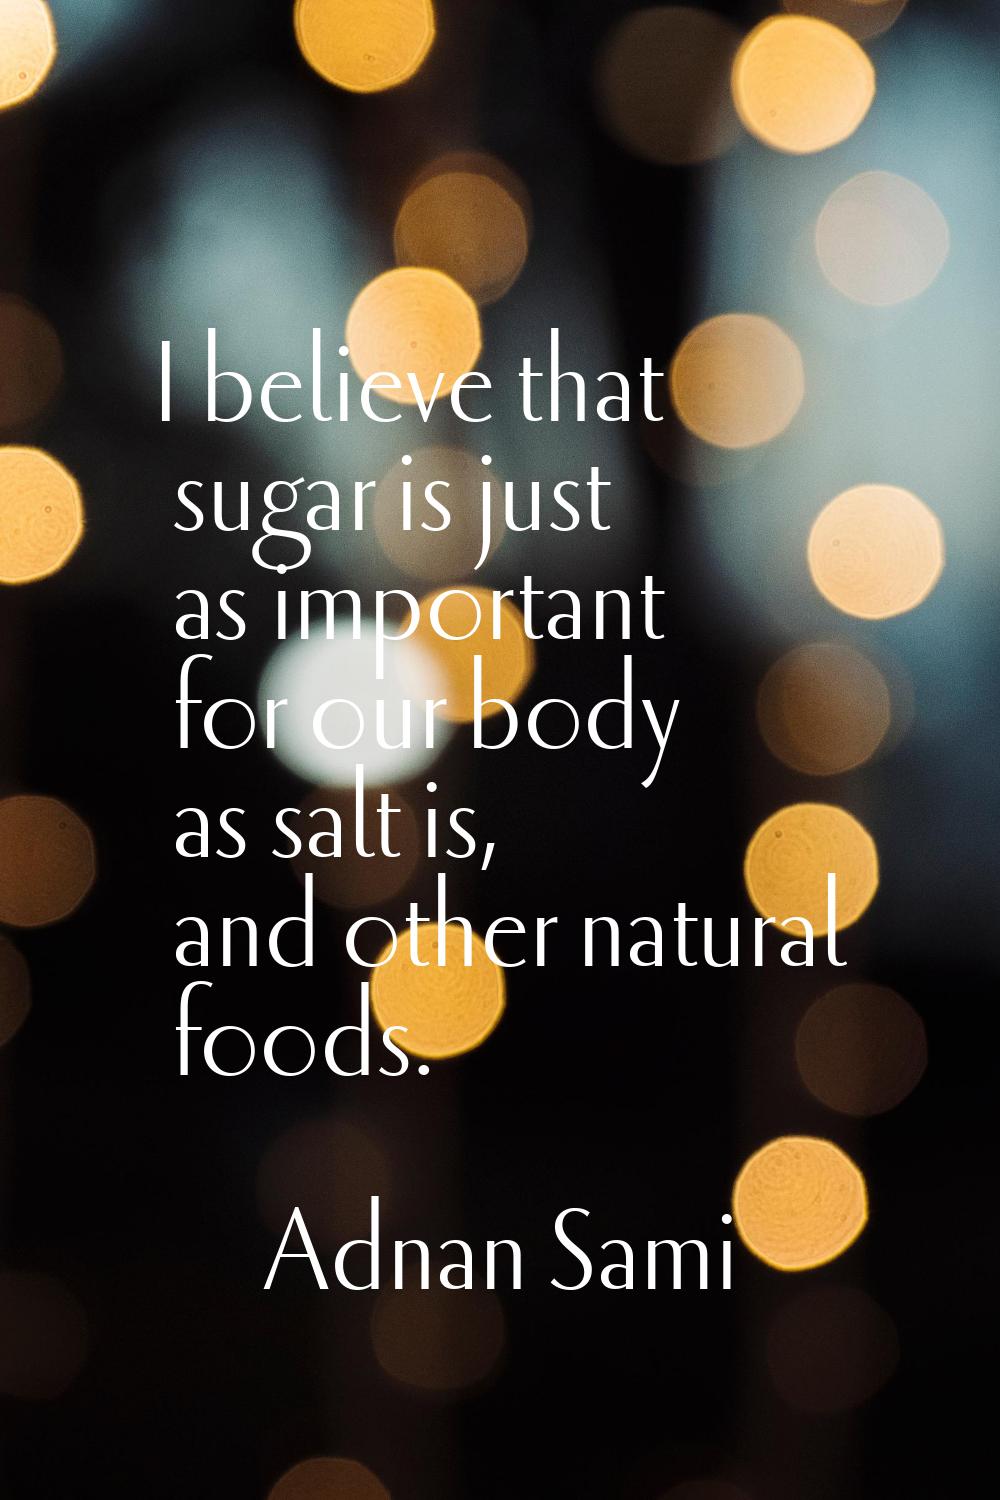 I believe that sugar is just as important for our body as salt is, and other natural foods.